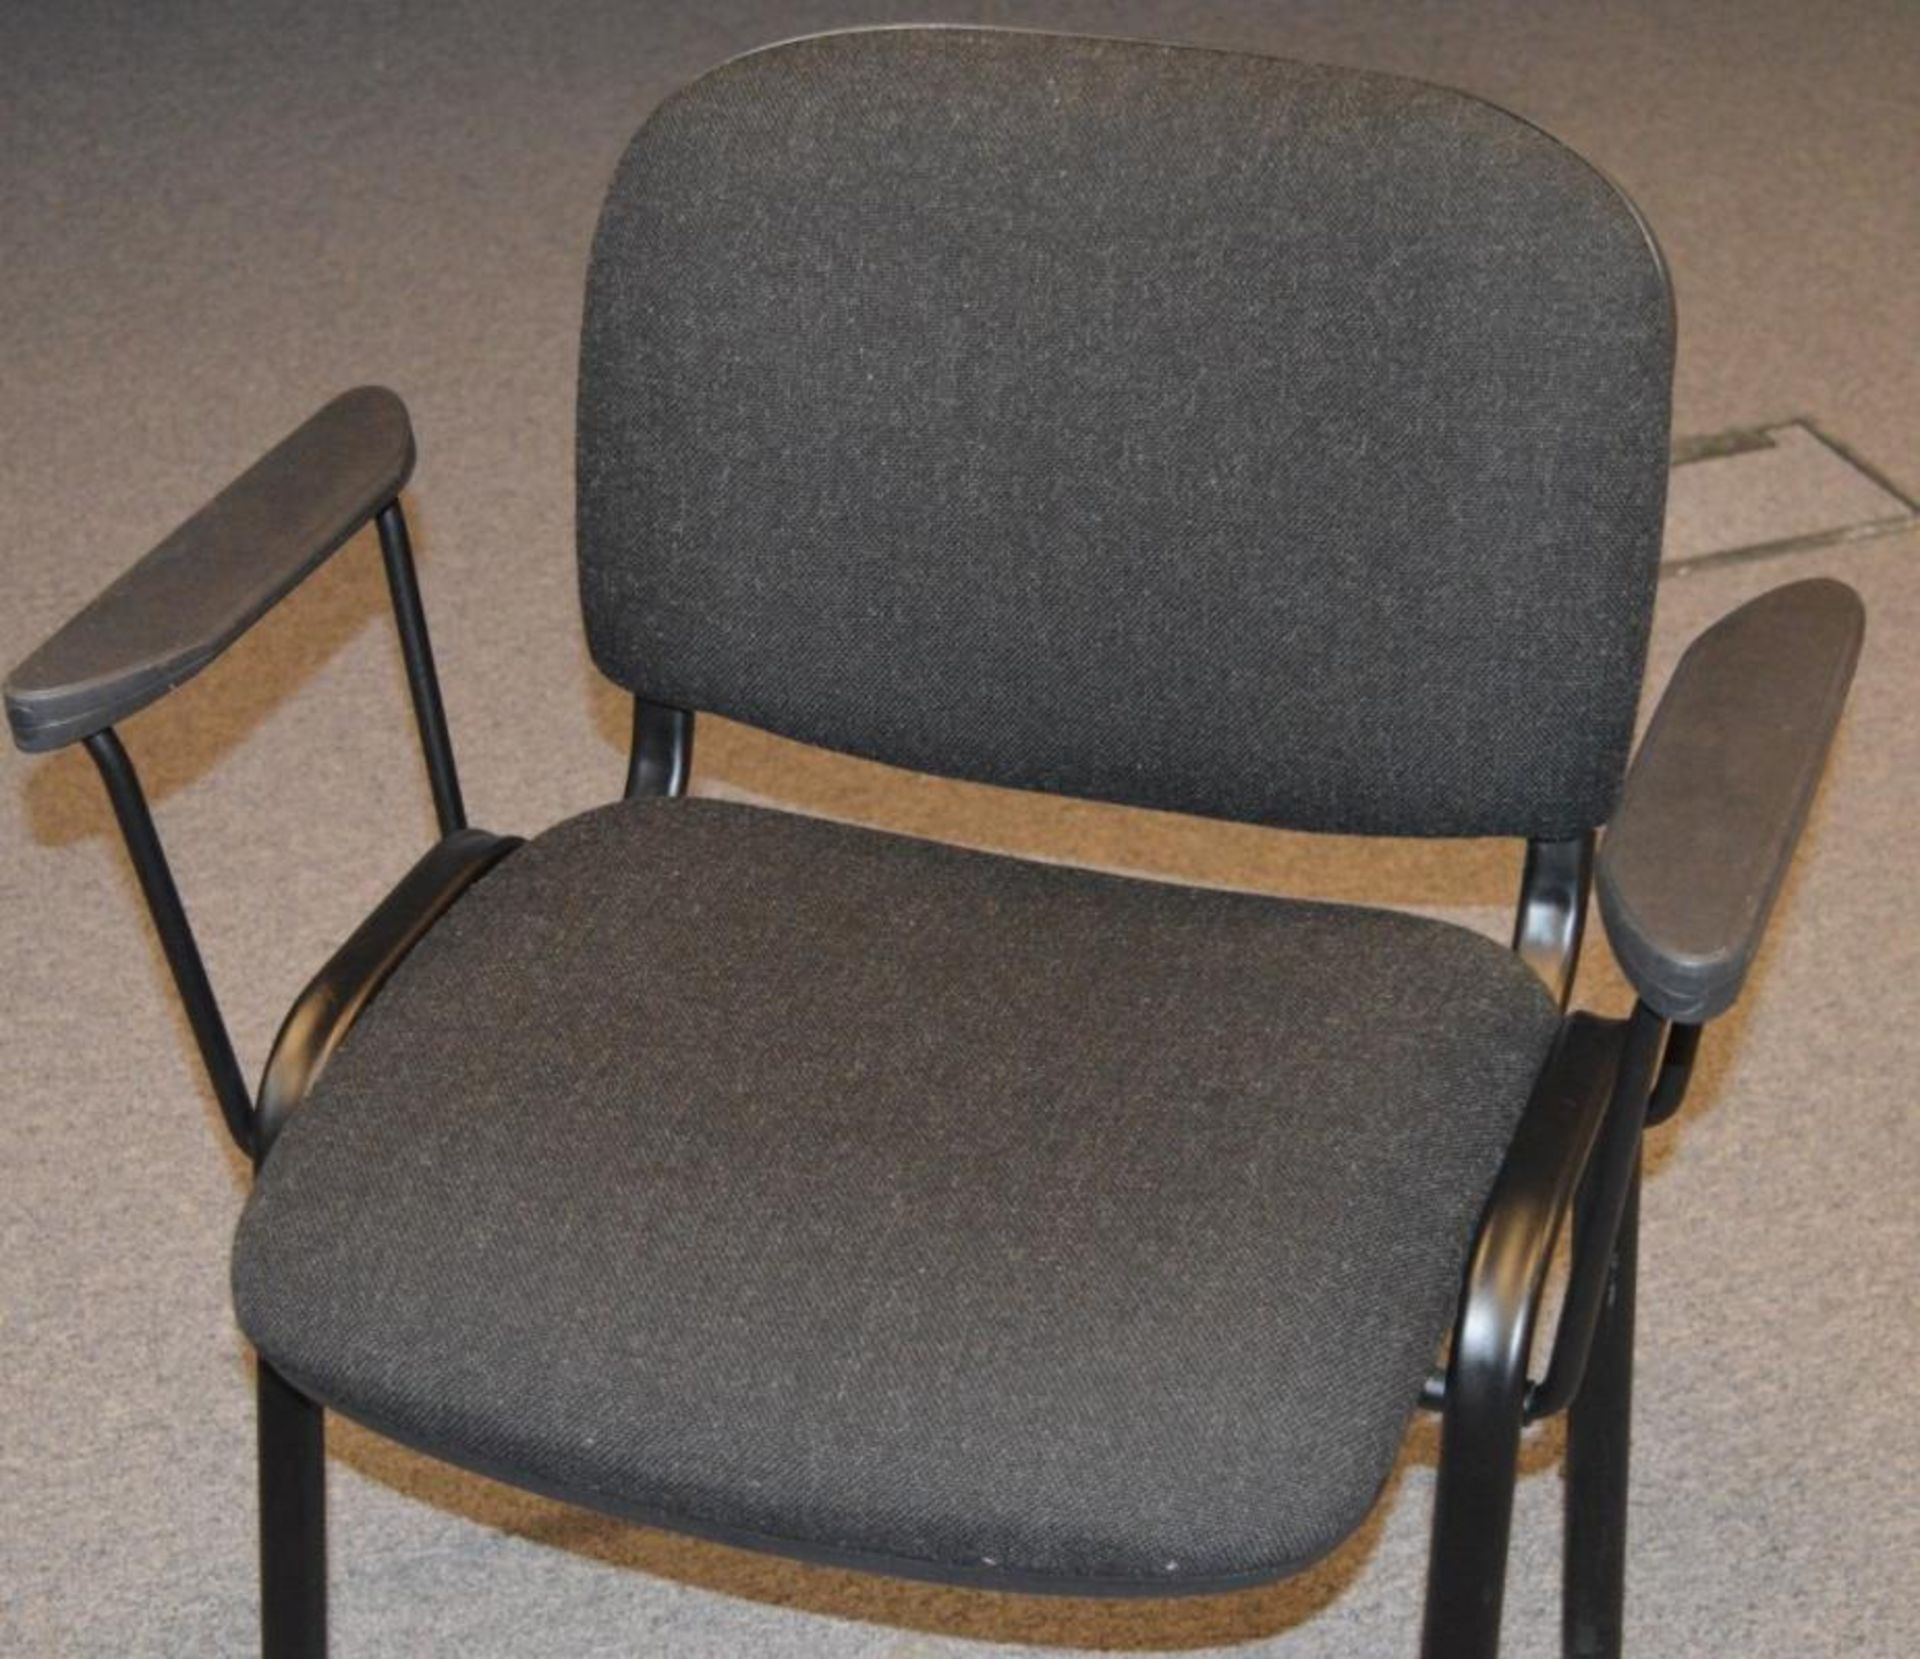 10 x Office Conference Chairs - Stackable Chairs With Adjustable Foldaway Arms and Hard Wearing Grey - Image 2 of 3